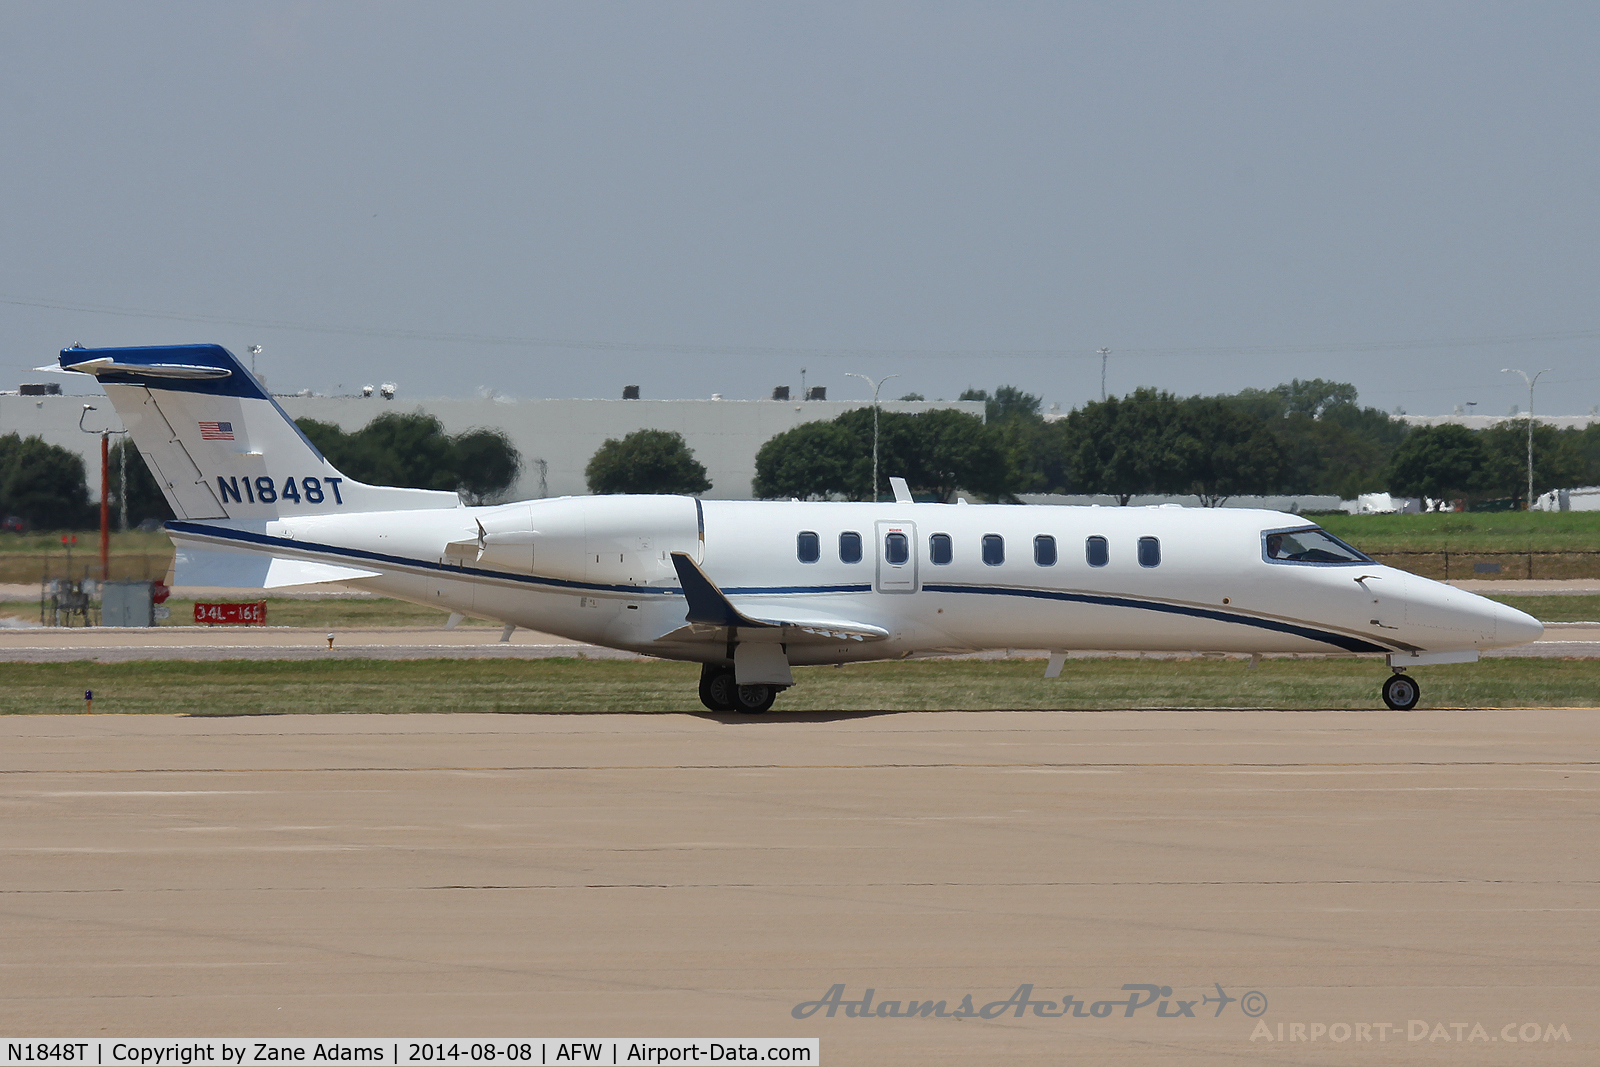 N1848T, 2005 Learjet 45 C/N 2035, At Alliance Airport - Fort Worth, TX